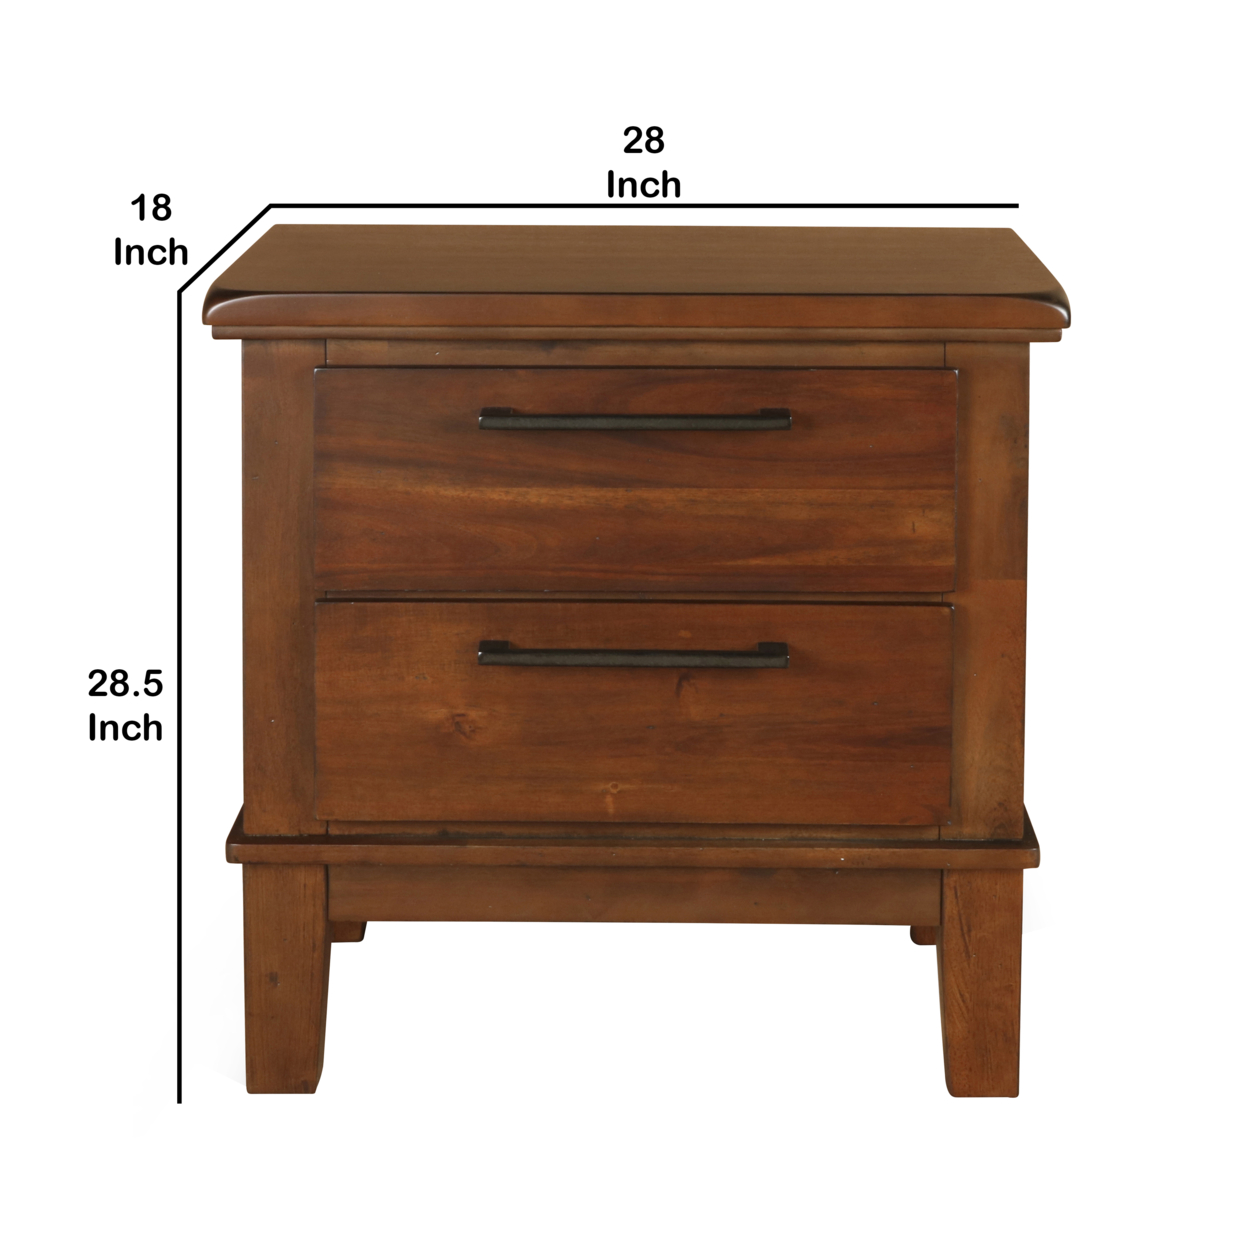 Wooden Nightstand With Chamfered Legs And 2 Spacious Drawers, Brown- Saltoro Sherpi